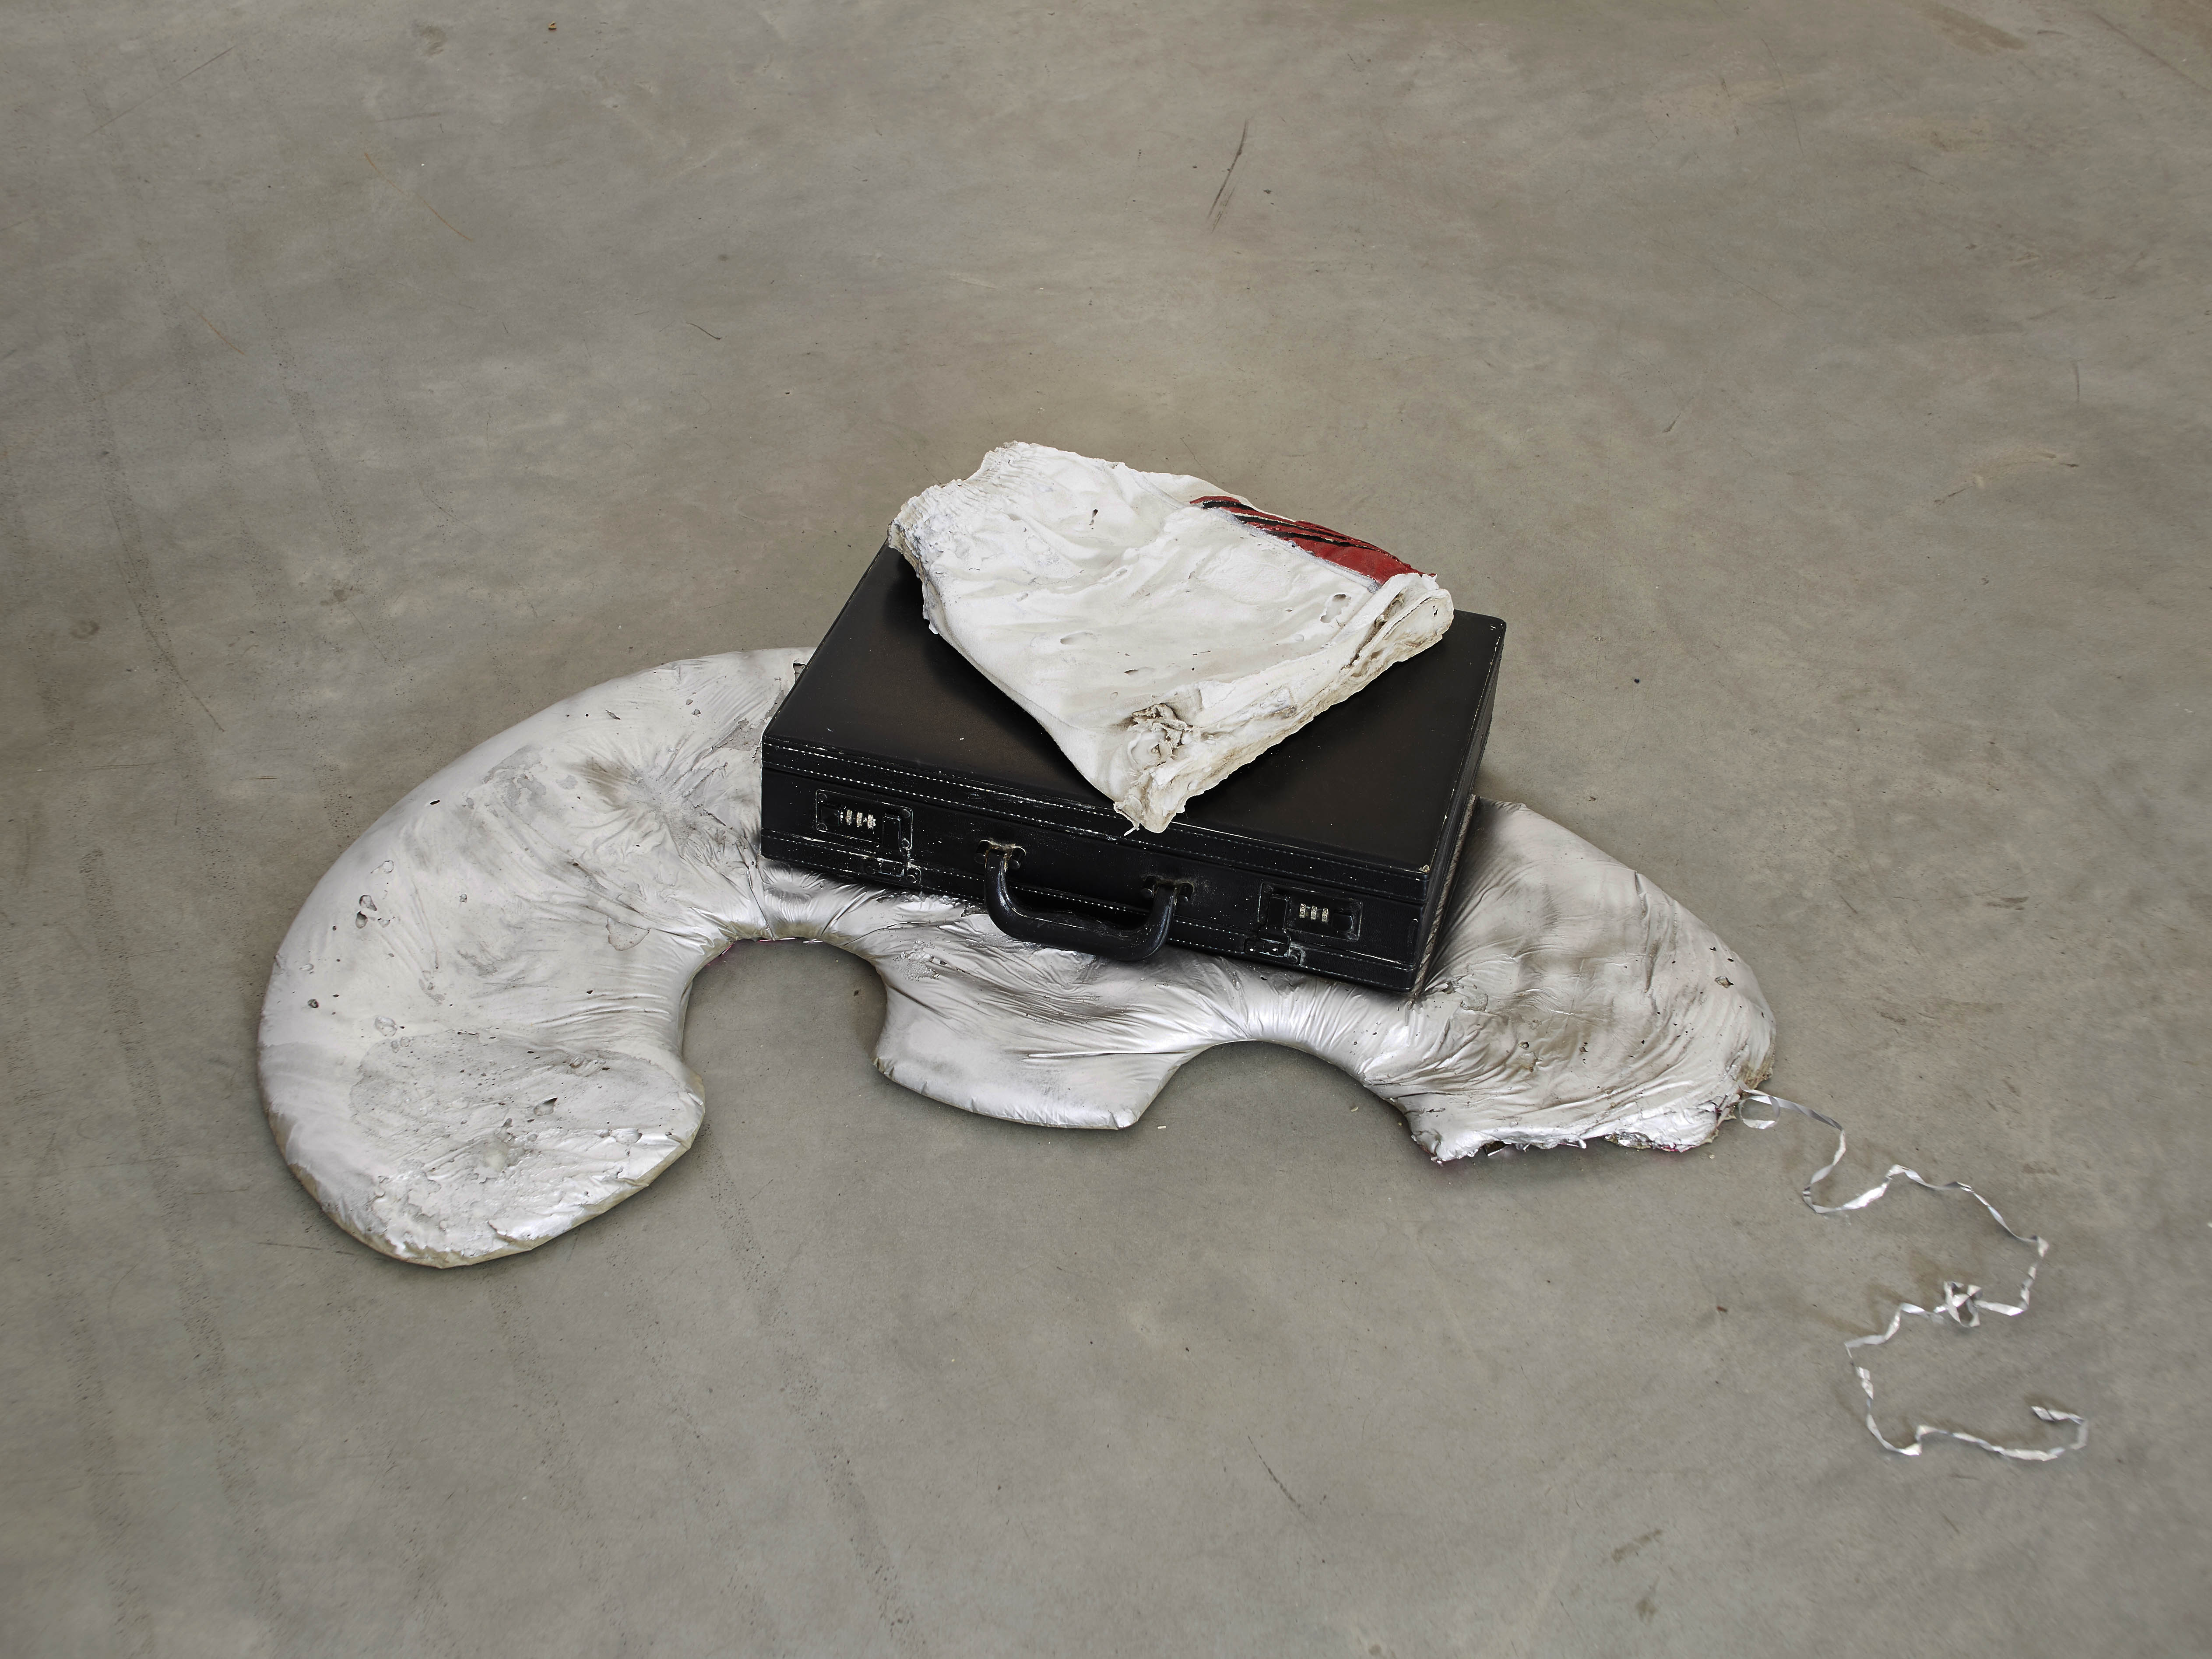 rose-salane-football-2016-found-briefcase-with-painted-plaster-cast-dimensions-variable-17-x-87-x-51-cm-edited